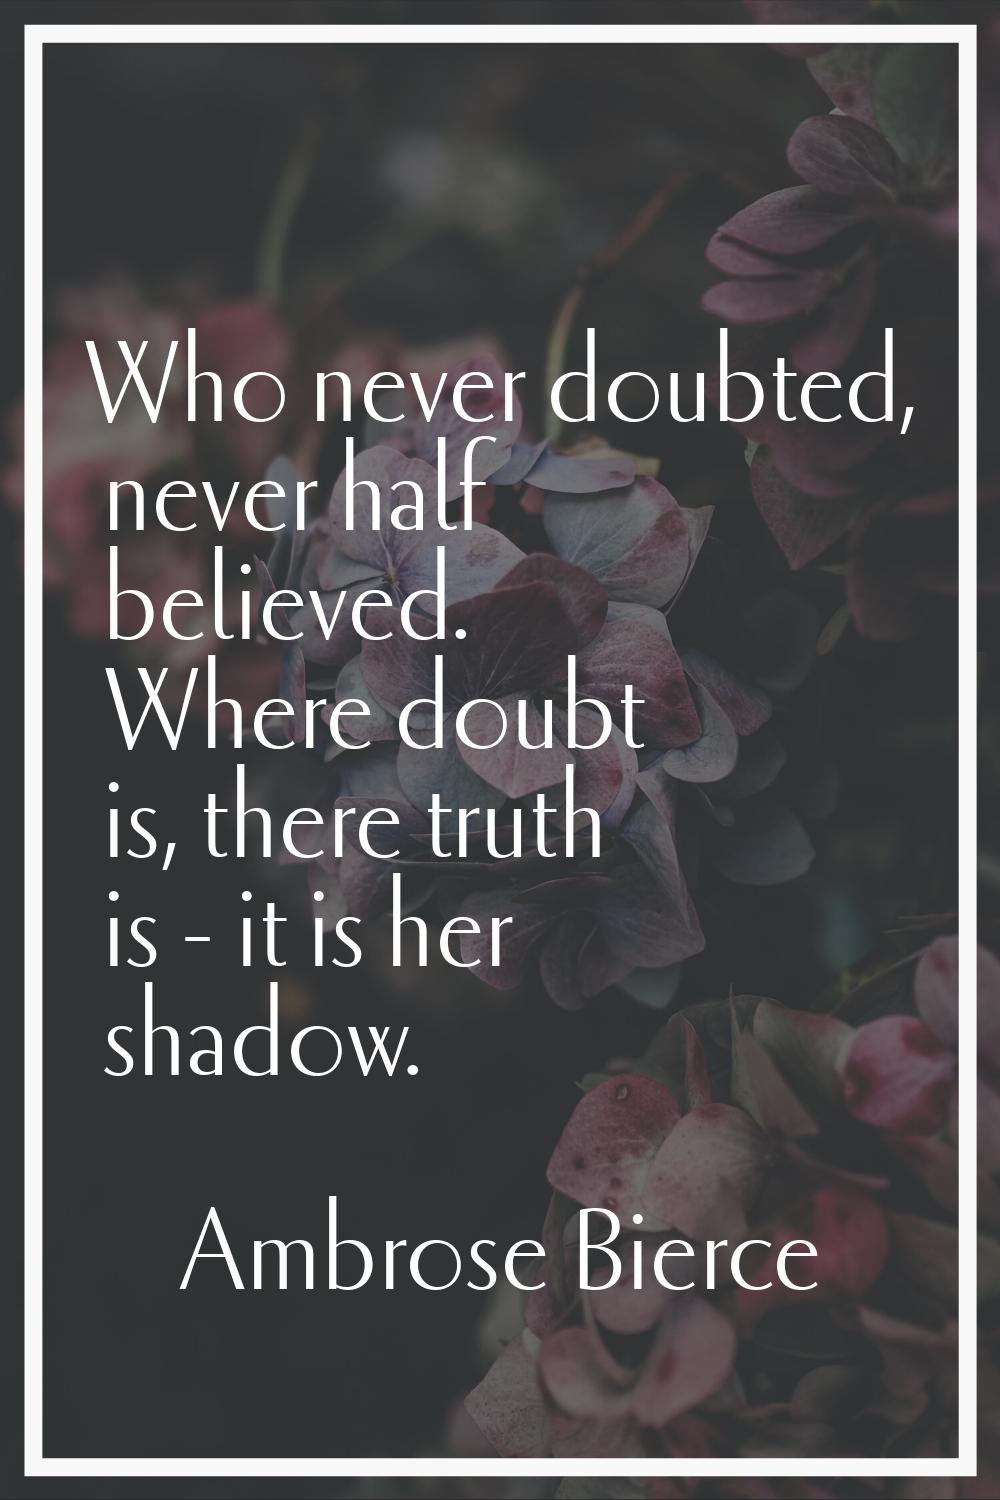 Who never doubted, never half believed. Where doubt is, there truth is - it is her shadow.